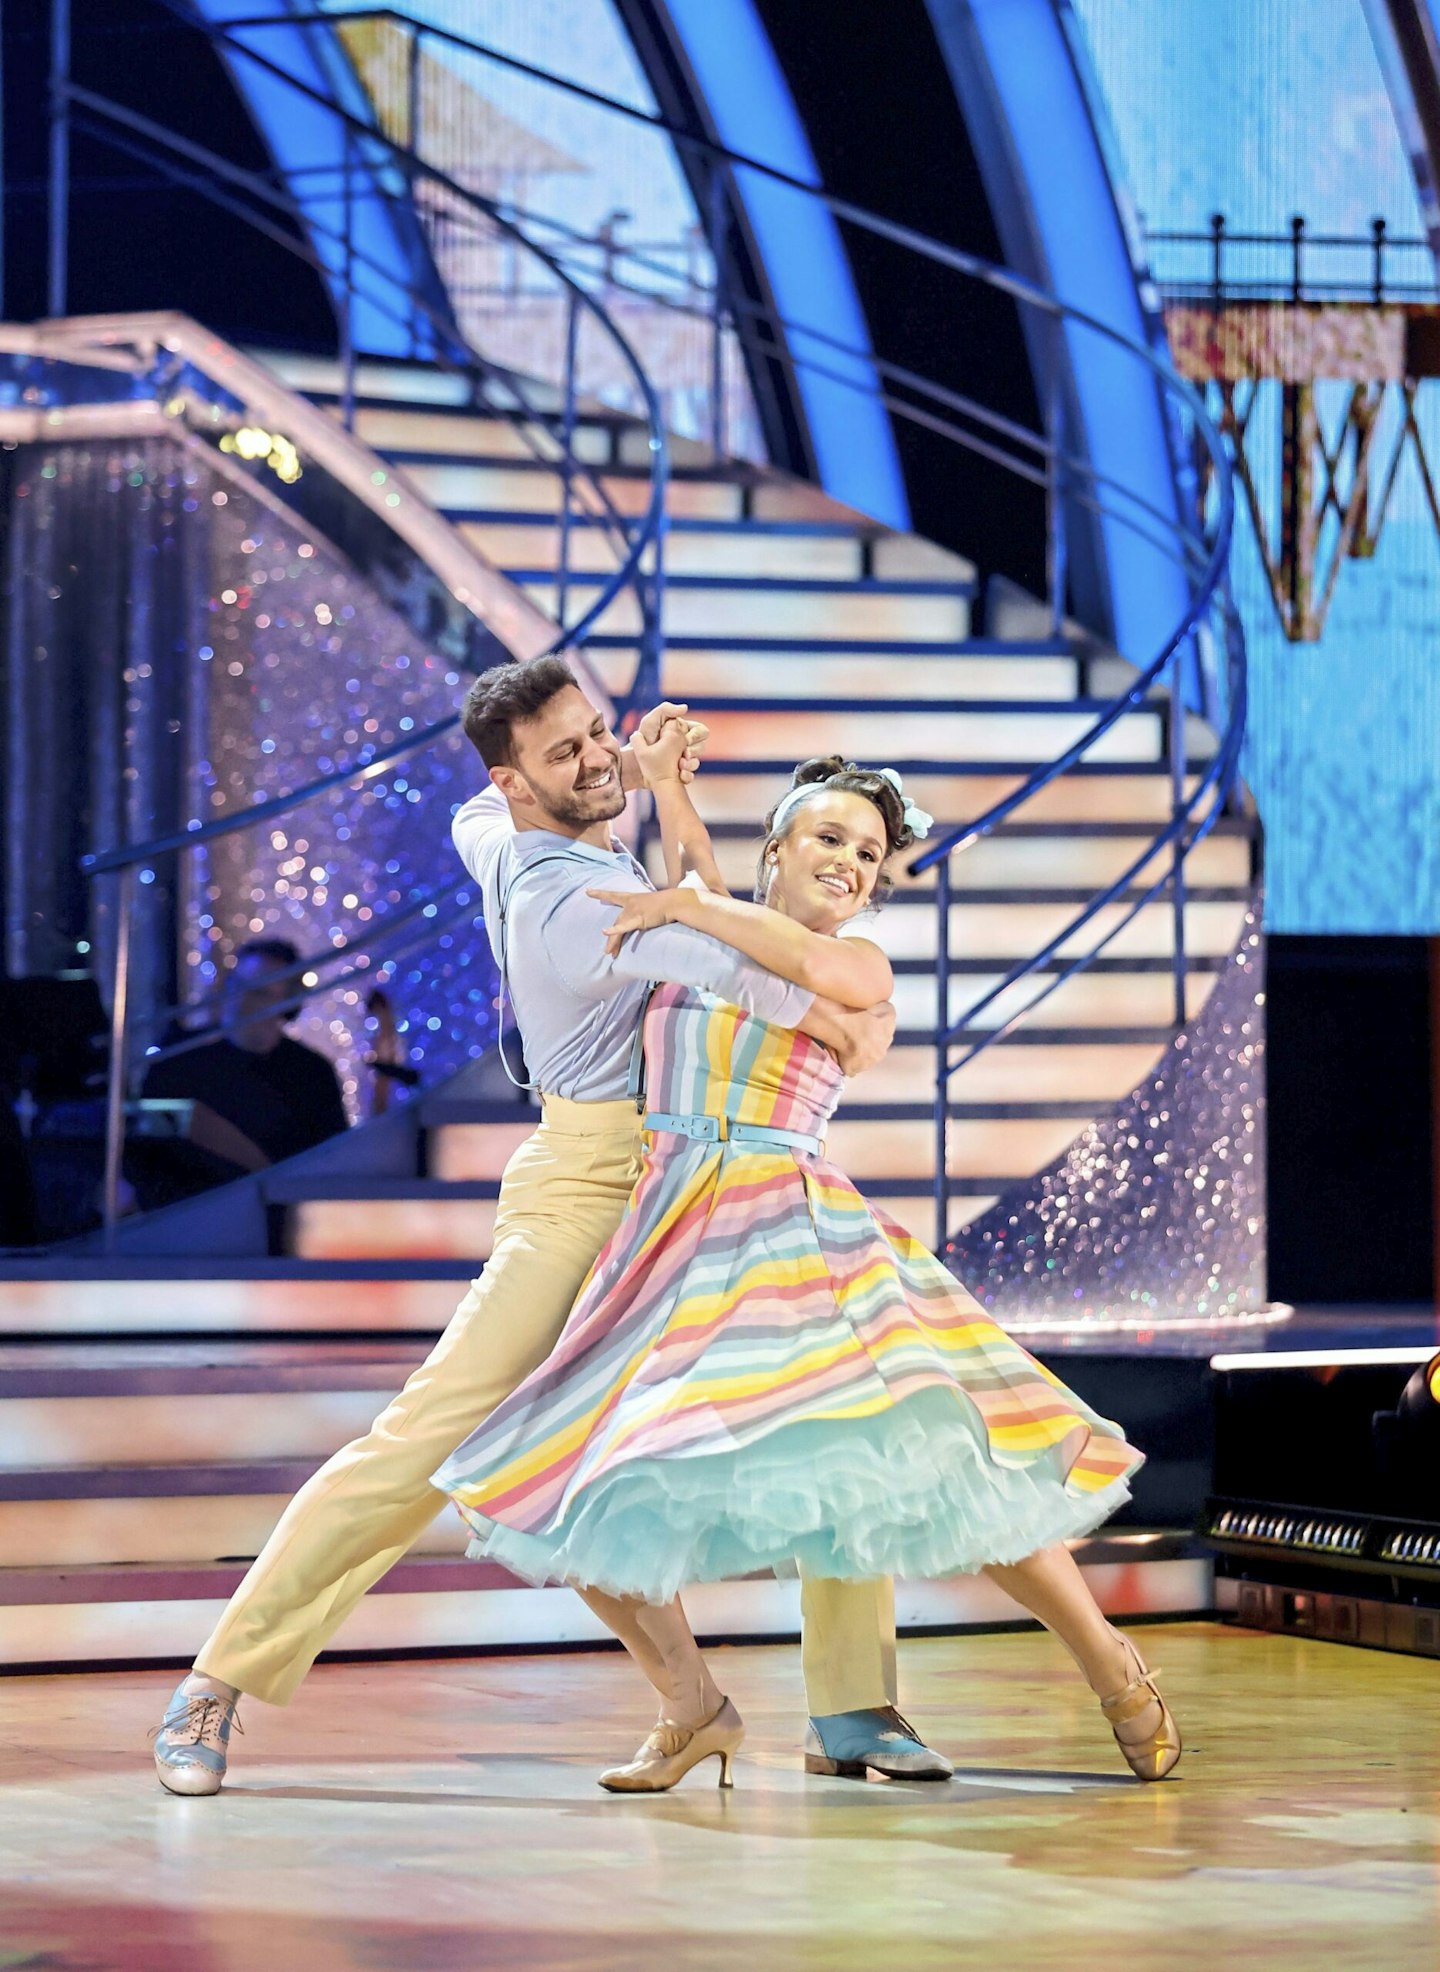 Ellie Leach and Vito Coppola Strictly Come Dancing